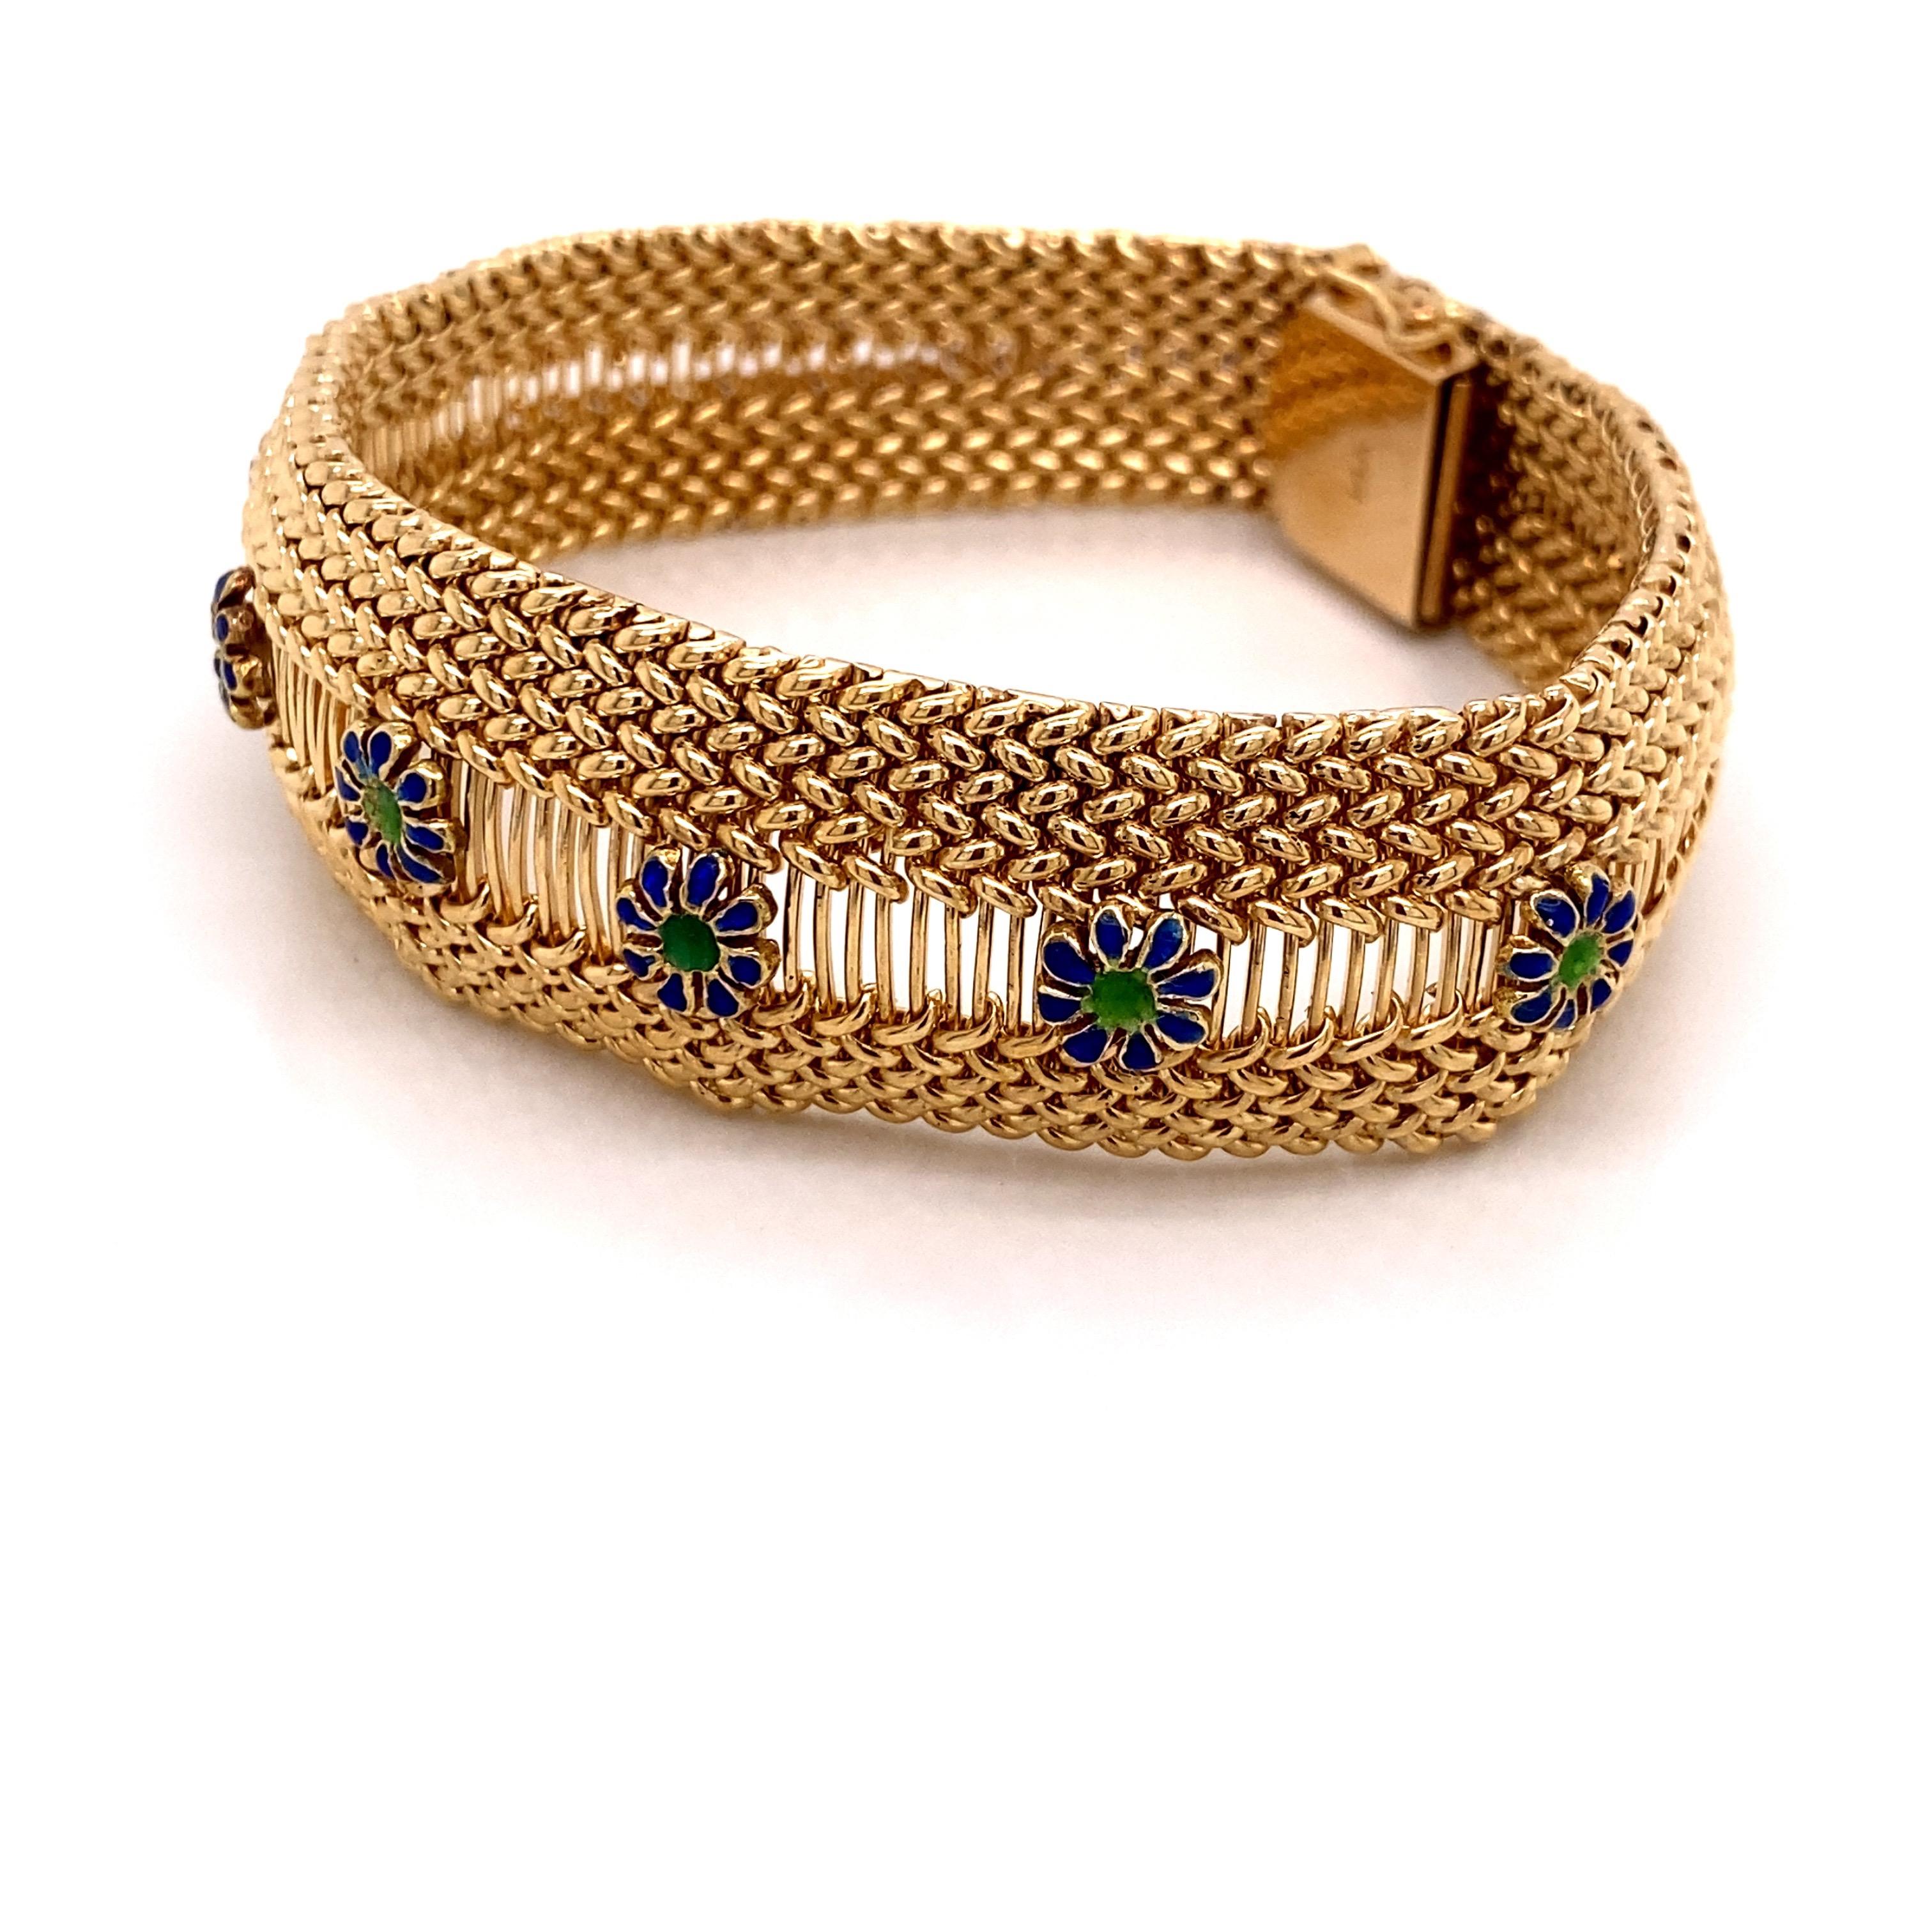 Vintage 1960s 14 Karat Yellow Gold Mesh Bracelet with Enamel Flowers In Good Condition For Sale In Boston, MA